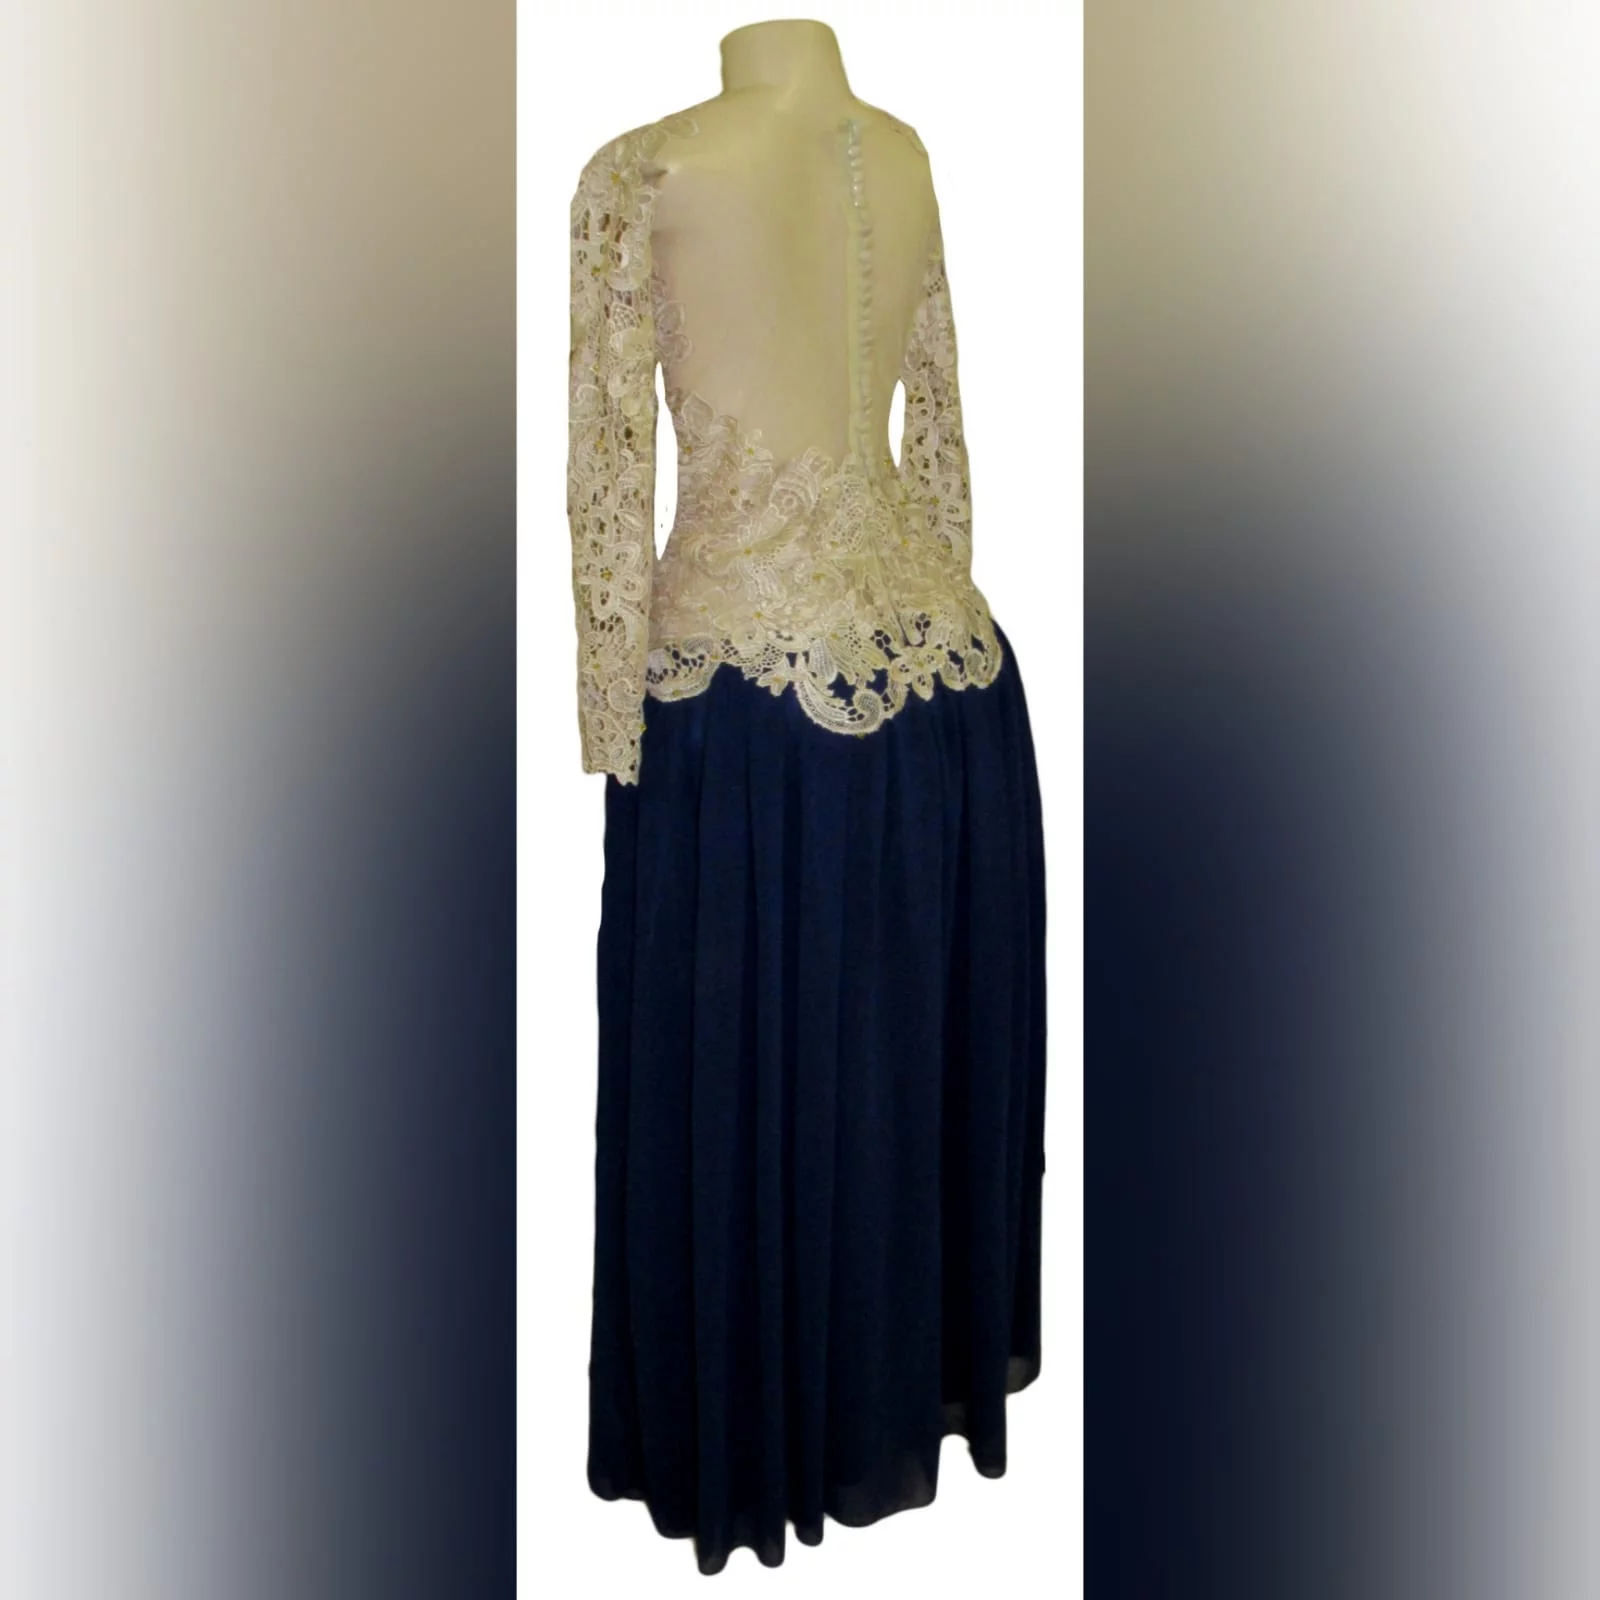 Navy blue and champagne lace prom dress 6 this evening dress design is a classic and can be worn to several occasions. Navy blue and champagne lace prom dress, with a lace bodice and long sleeves, illusion open back detailed with buttons and gold beads. Bottom in a navy blue gathered chiffon adding a great movement to the dress.